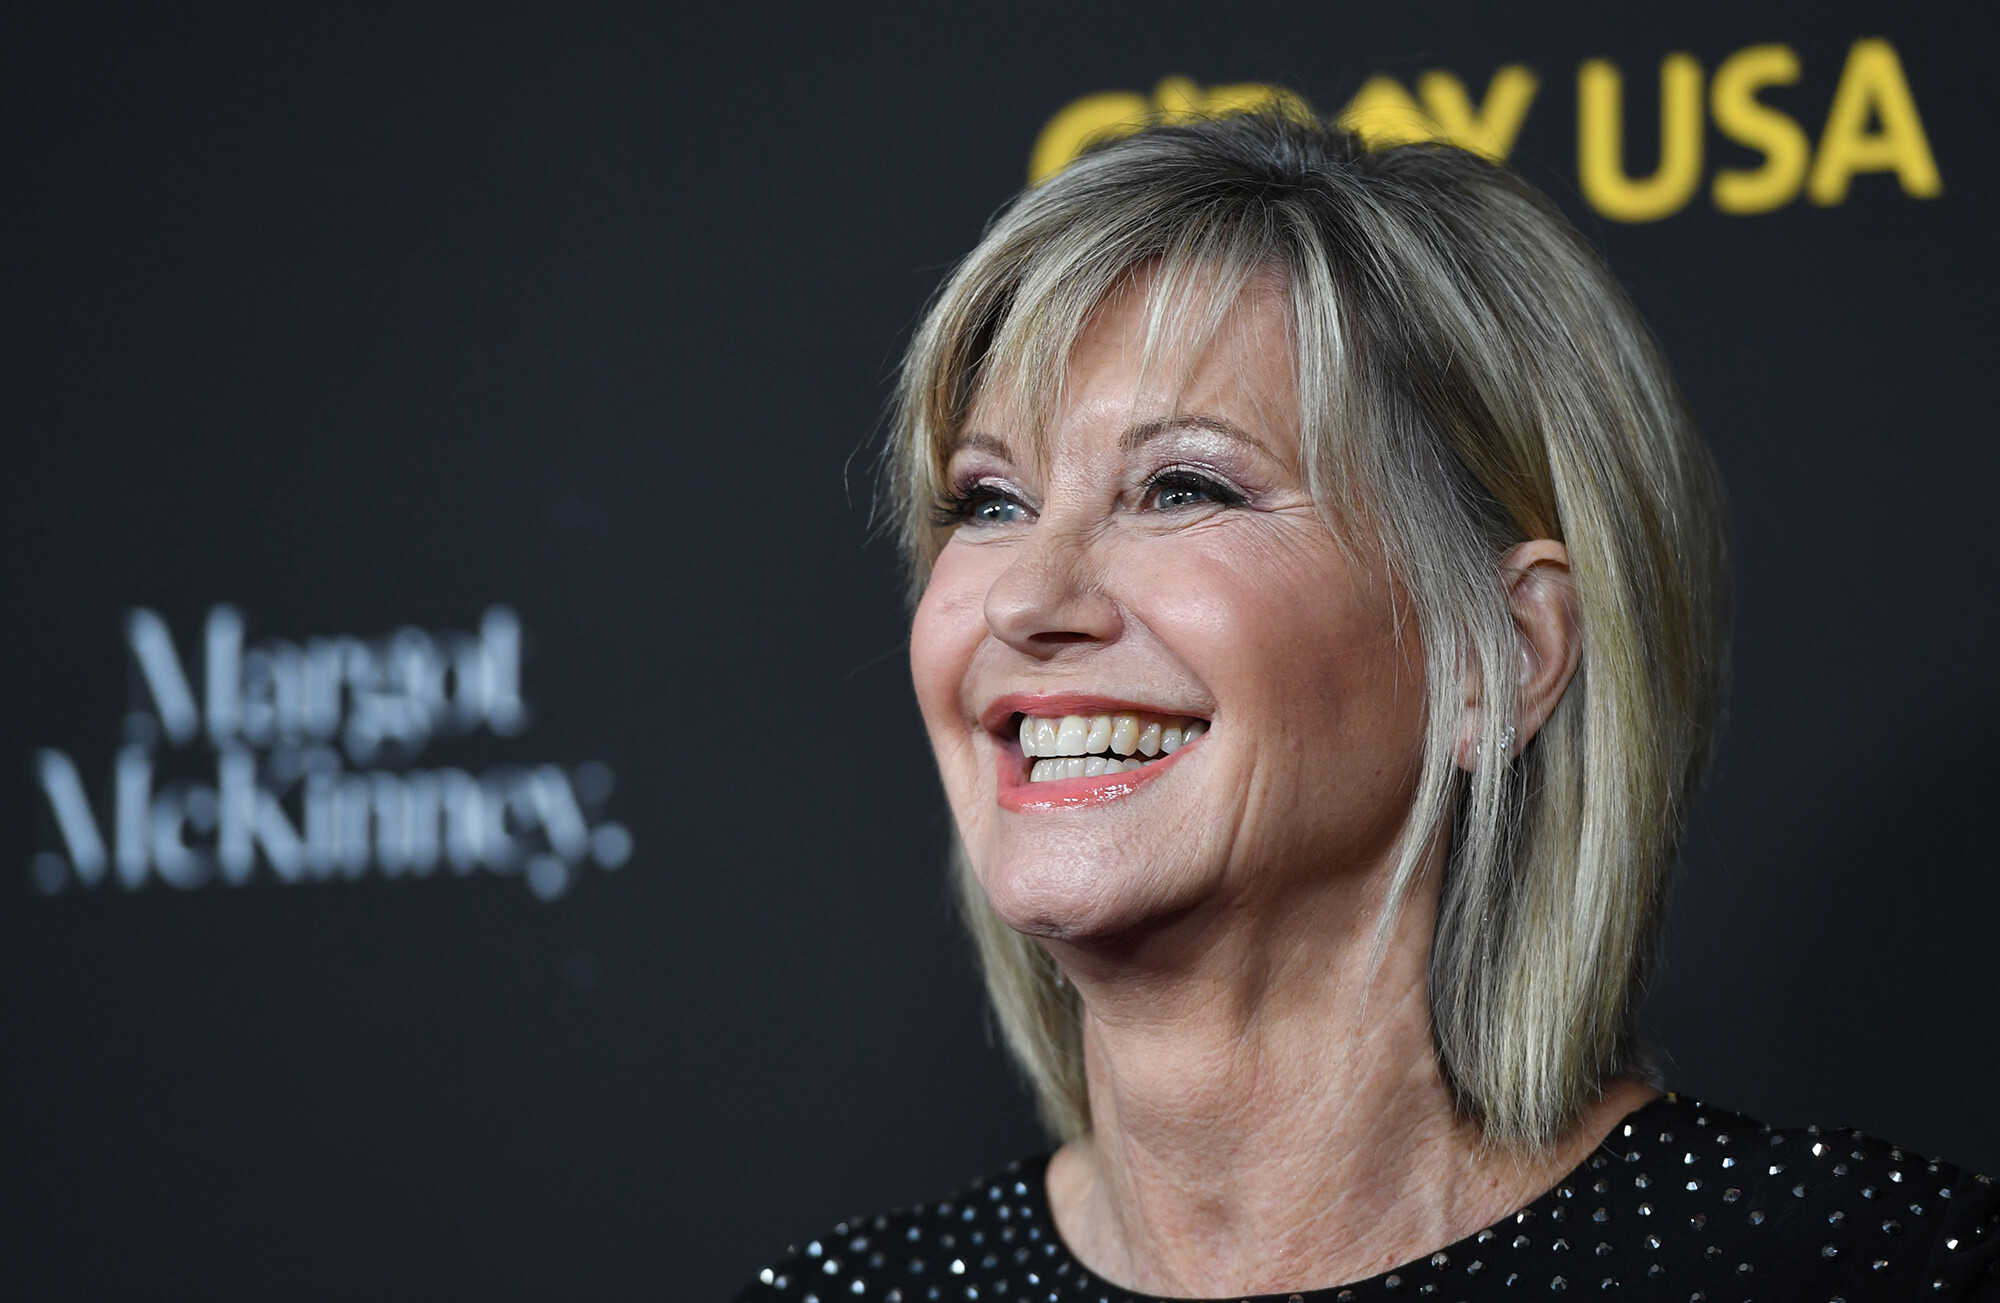 Olivia Newton-John says she has her good days and her bad days as she once again battles cancer. The singer is shown here on January 27